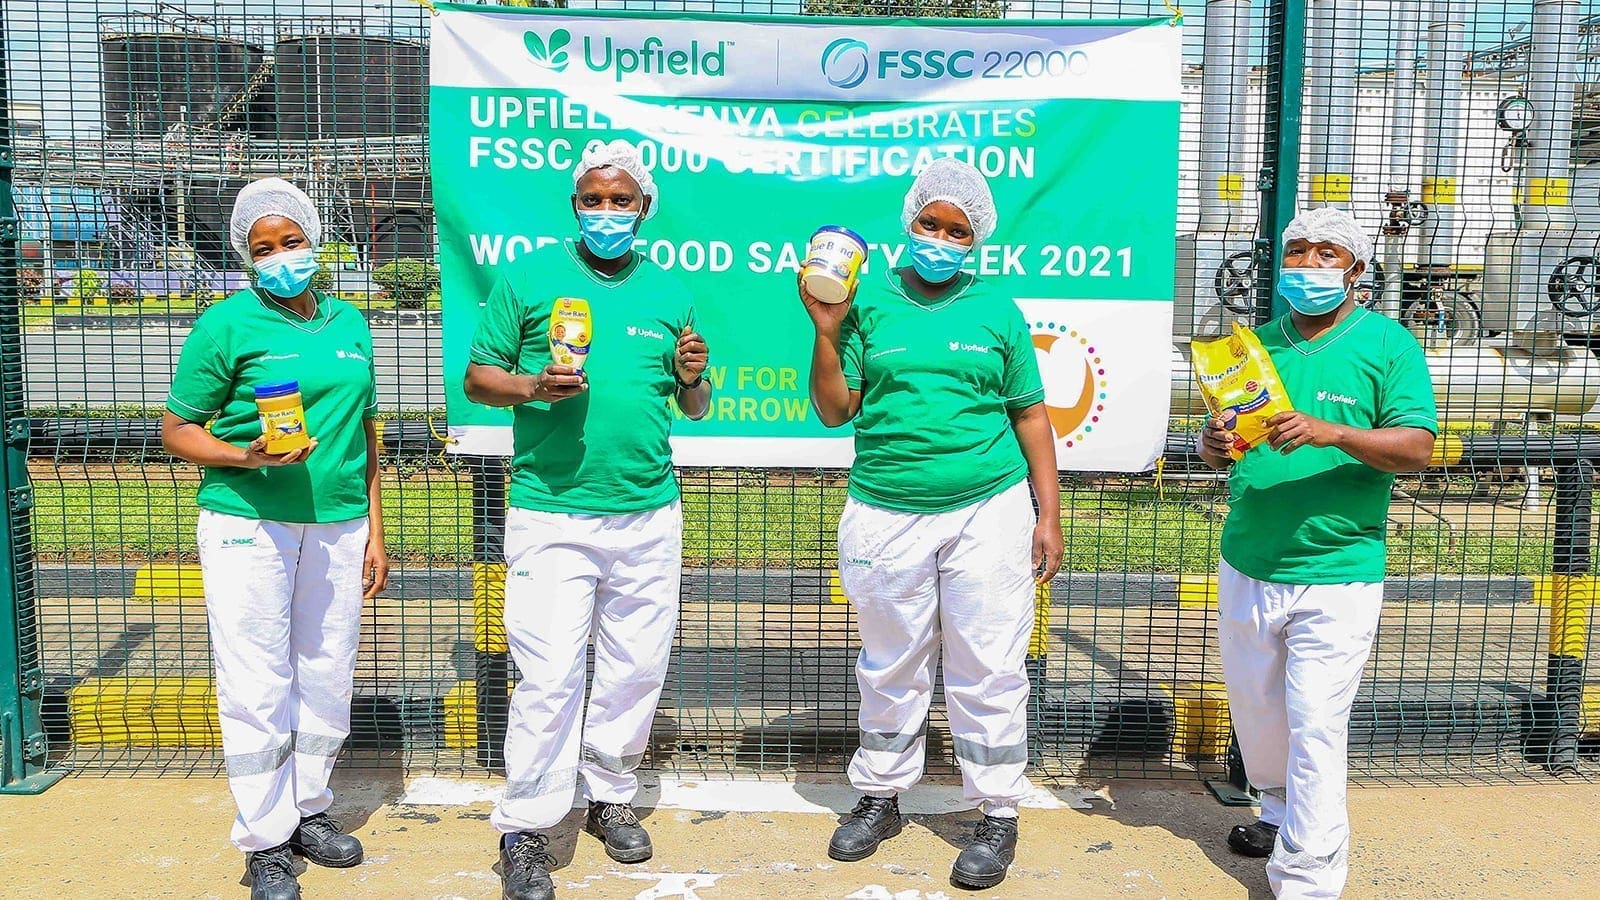 Upfield Kenya joins band of manufacturers driving food safety agenda by obtaining FSSC 22000 Certification